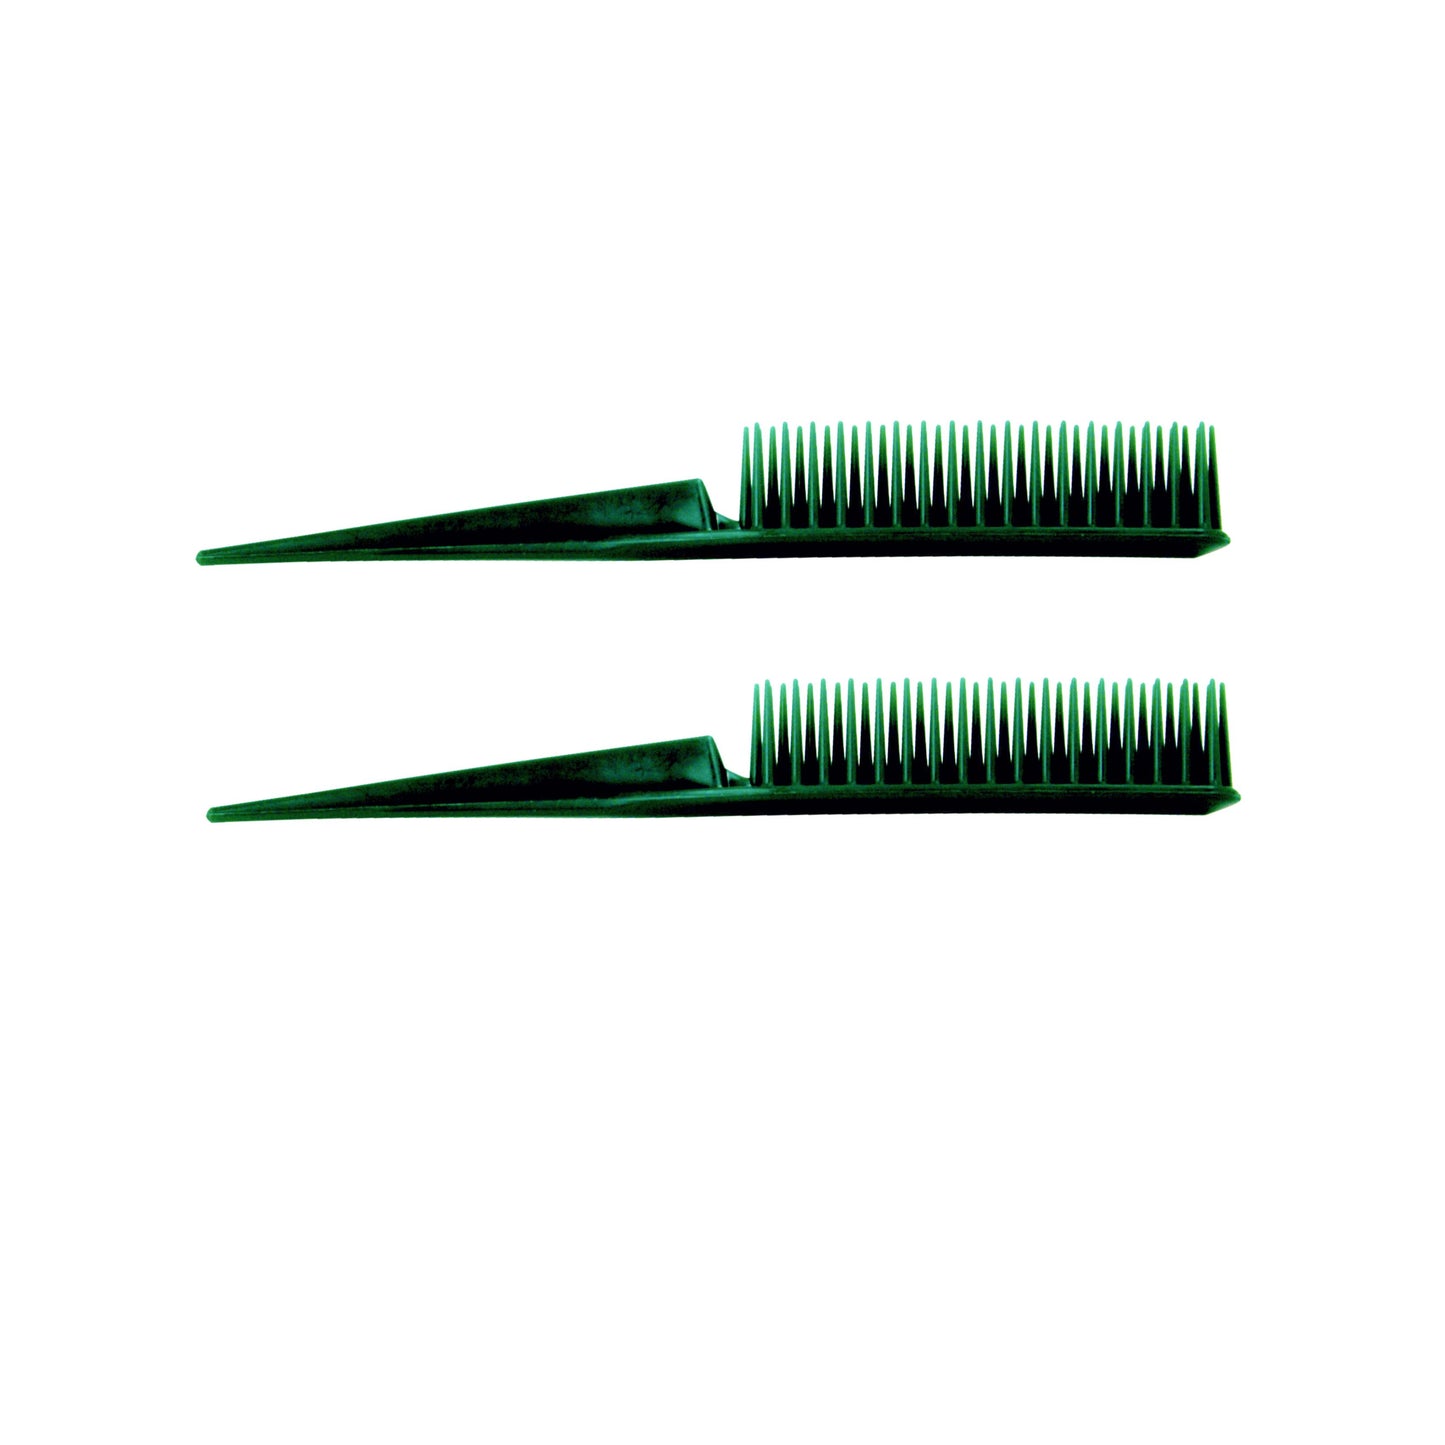 Amelia Beauty, 7in, 3 Row Styling Comb For Detangling, Tease, Defining And Separating Curls - Green